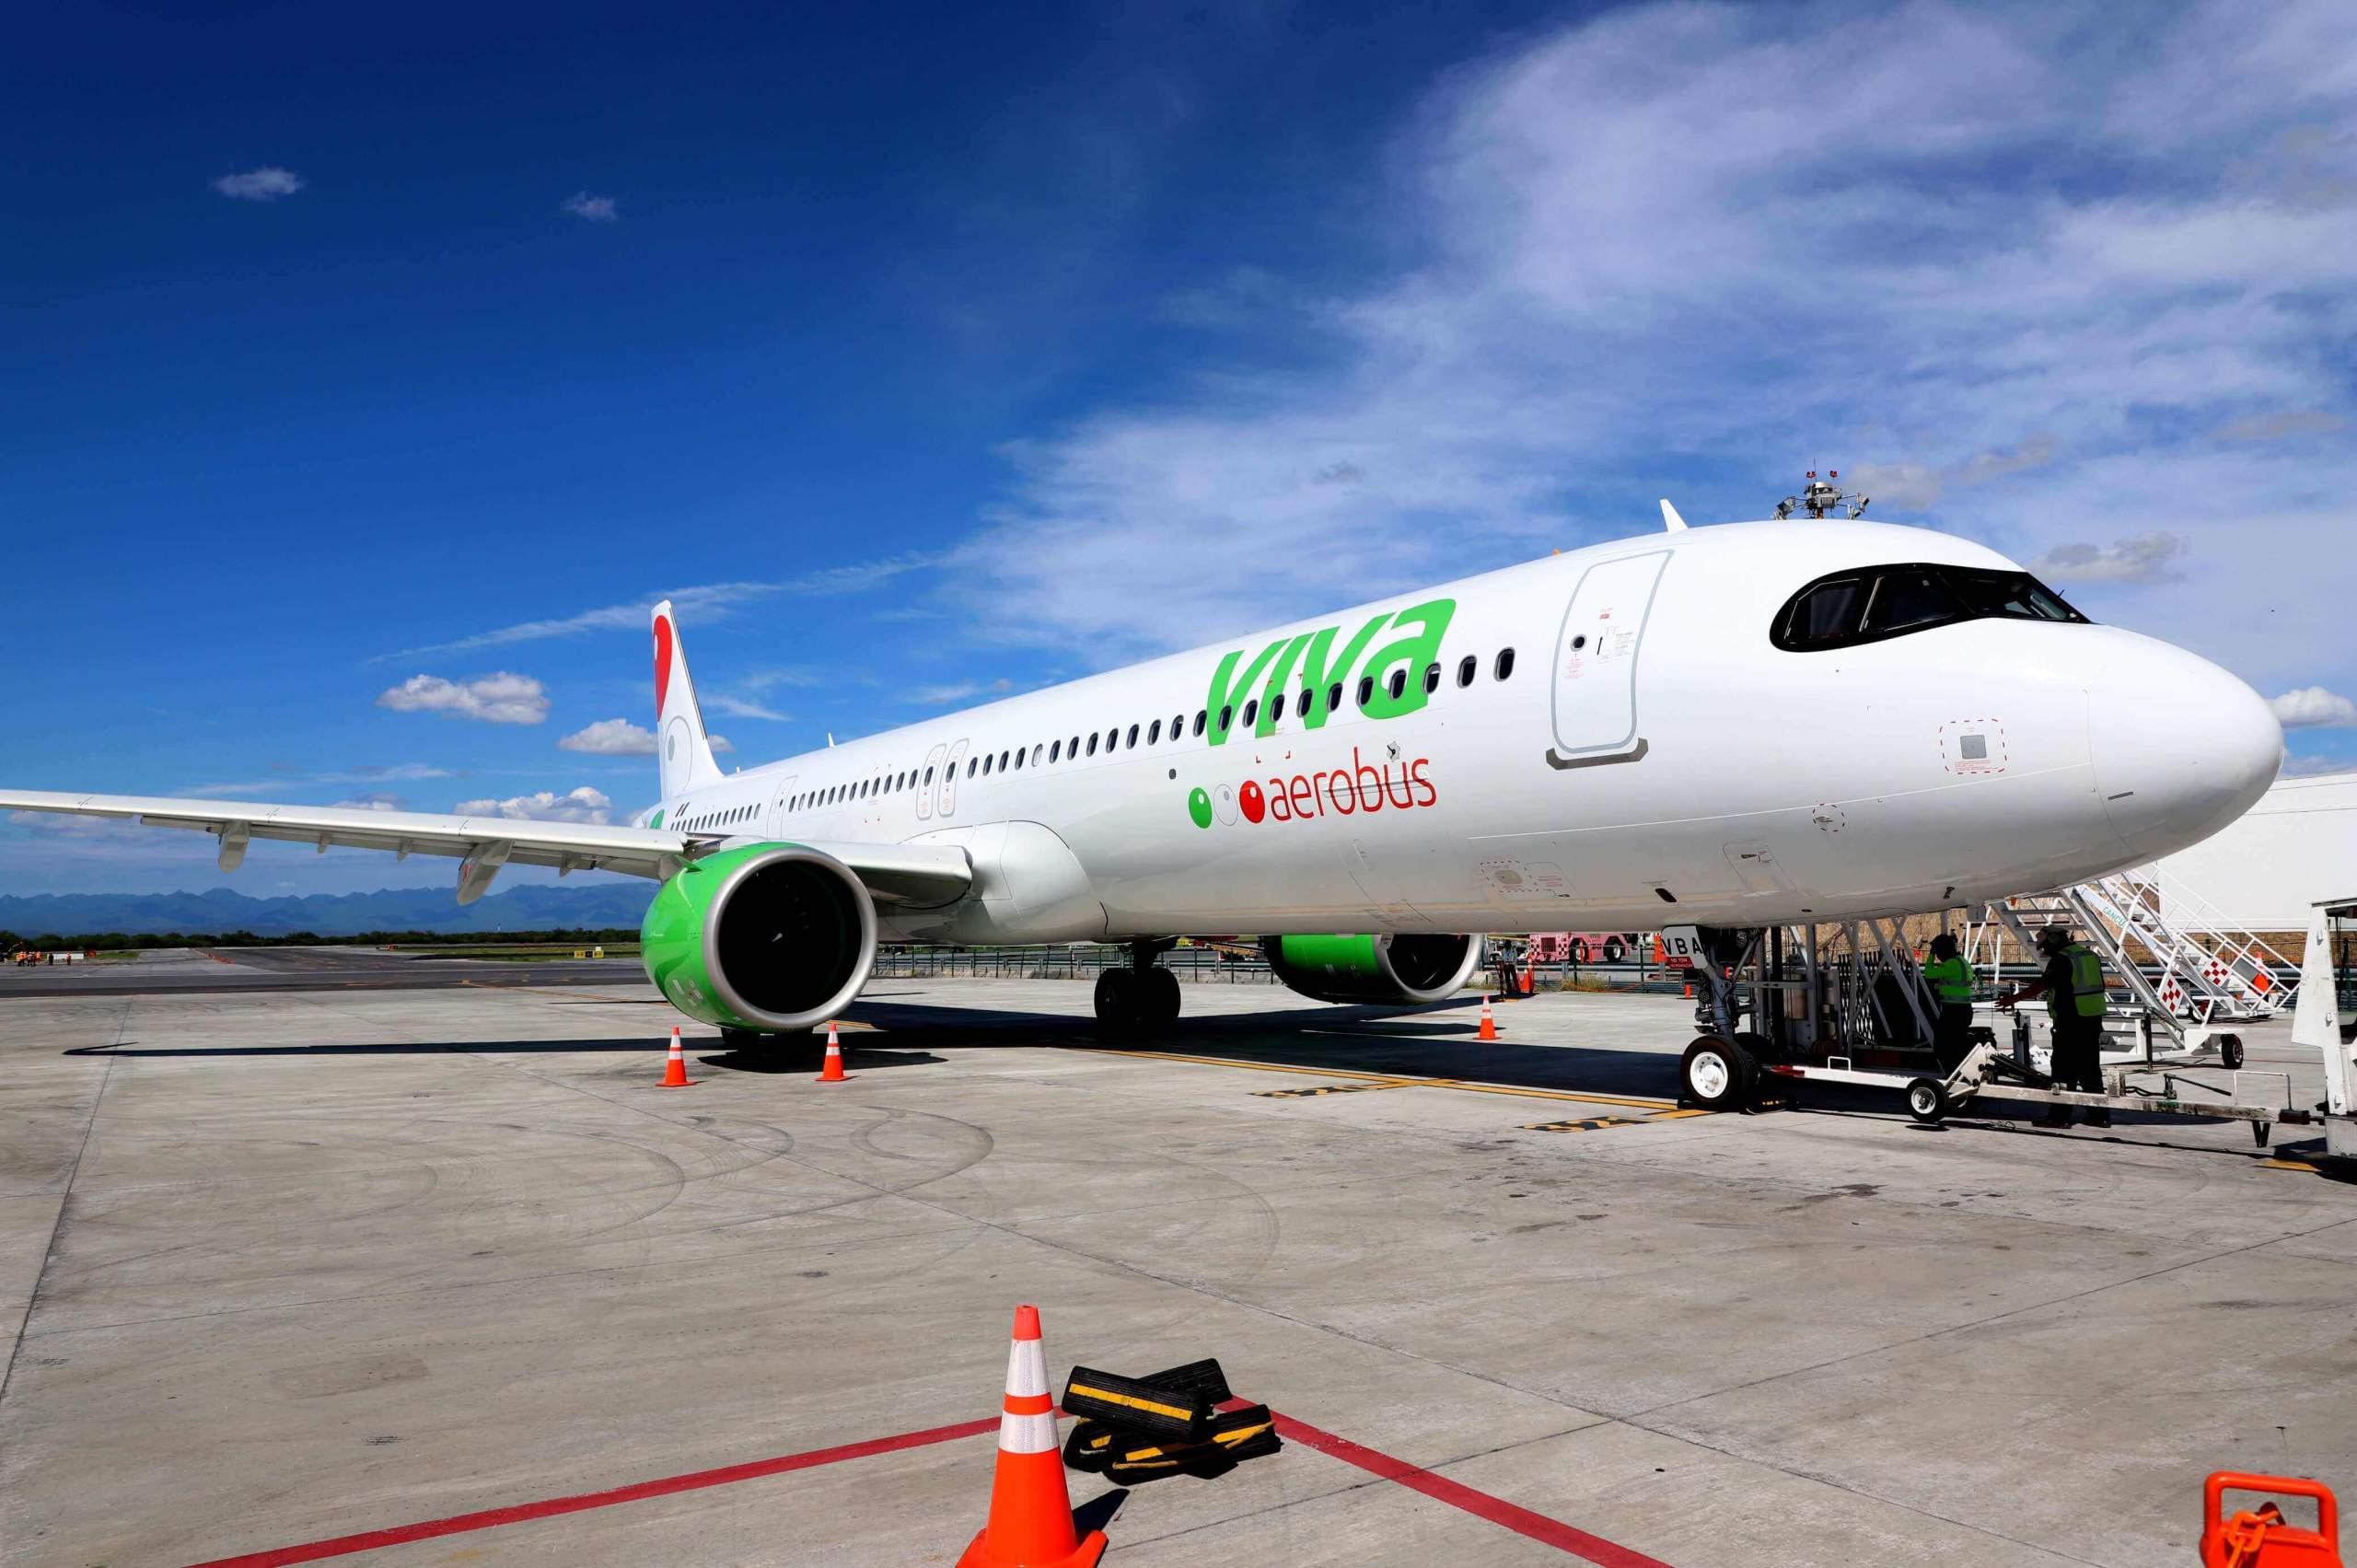 VivaAerobus to make its first flight with sustainable fuel